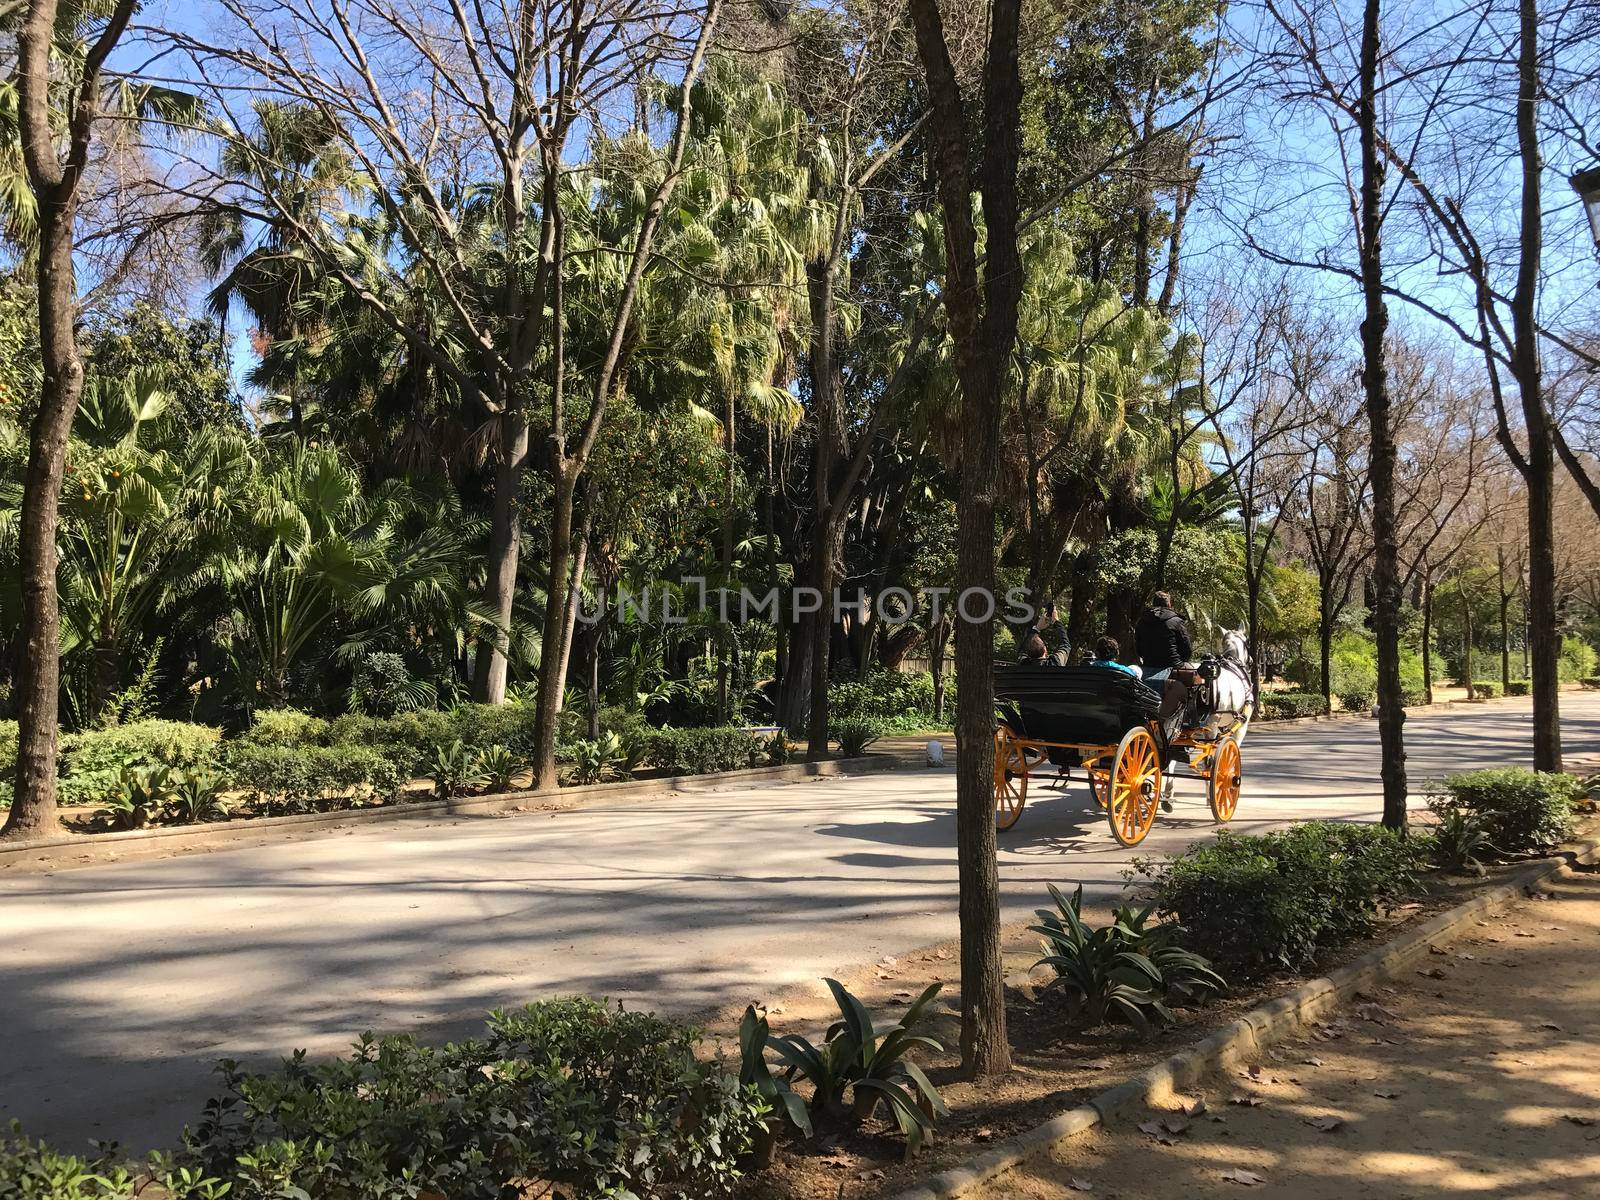 Horse and carriage in Maria Luisa Park in Seville Spain